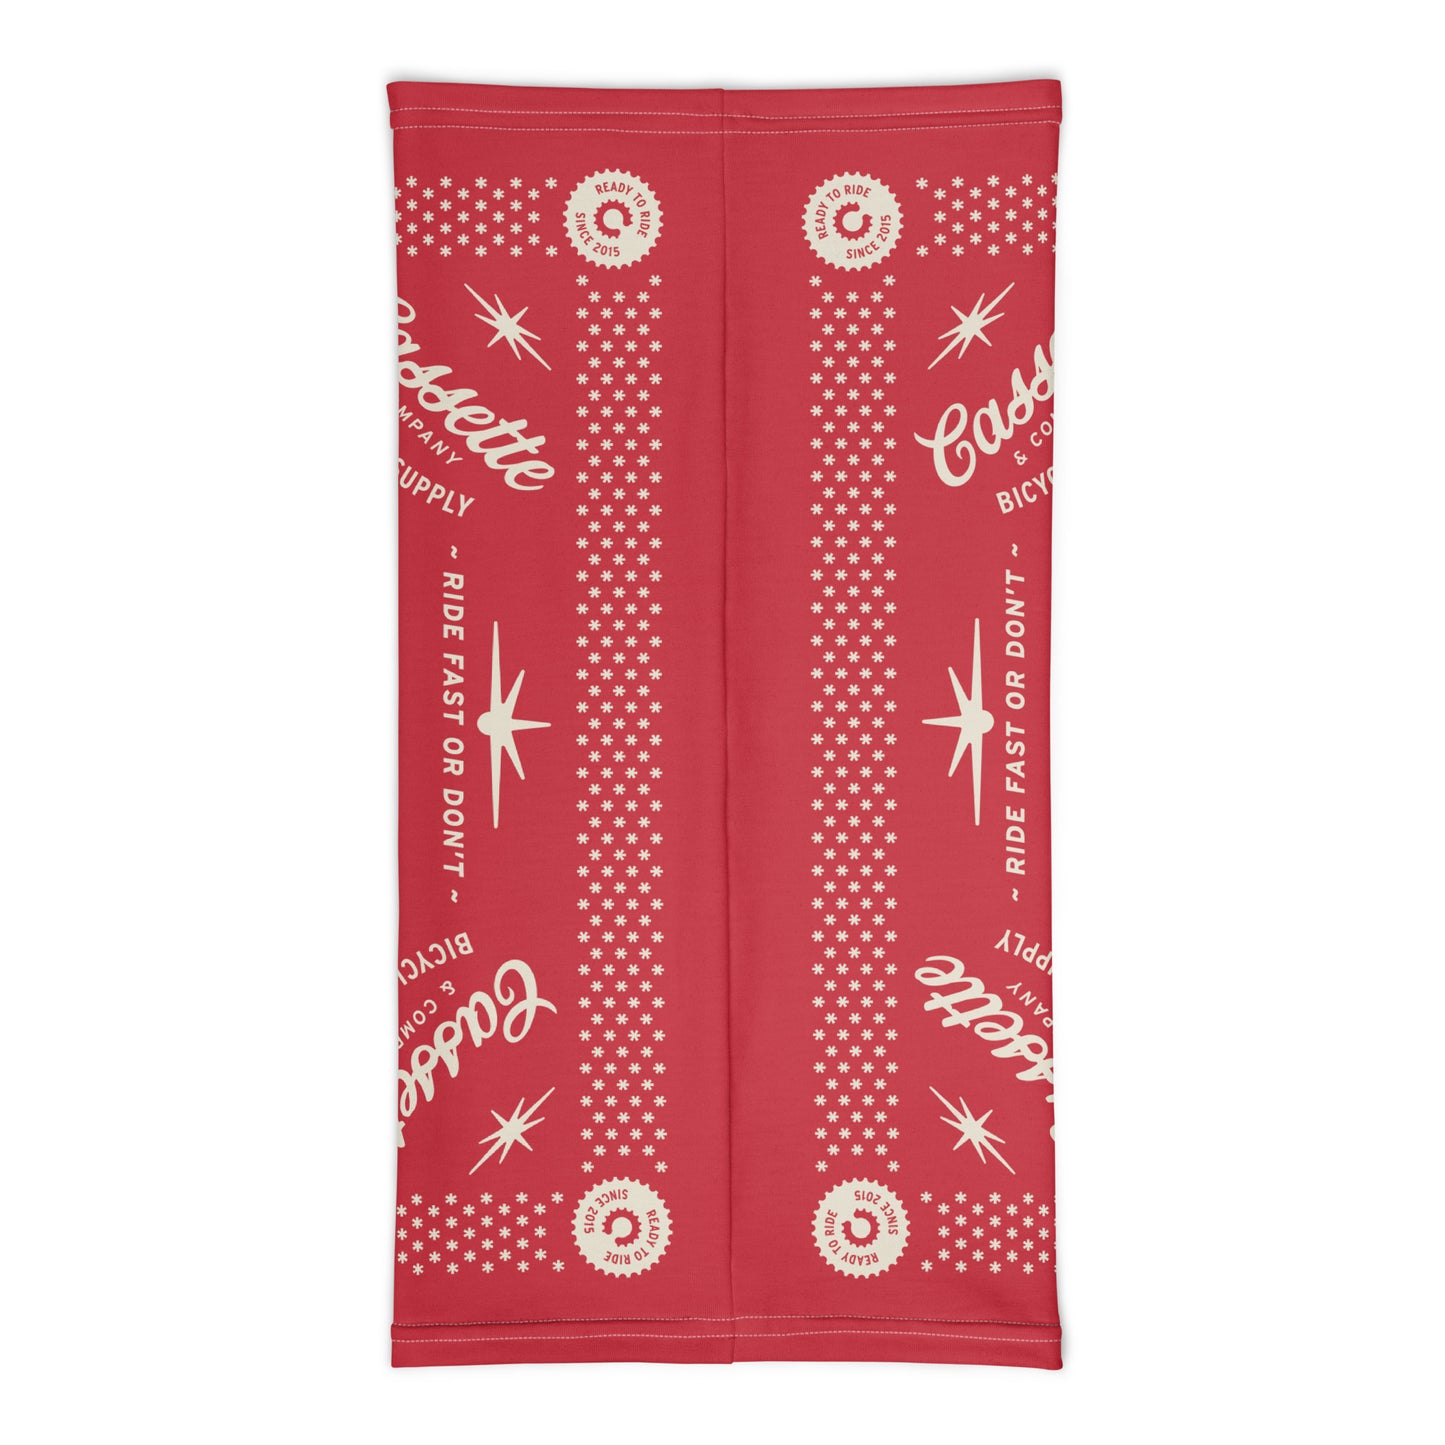 Flat lay of unfolded red cycling neck warmer